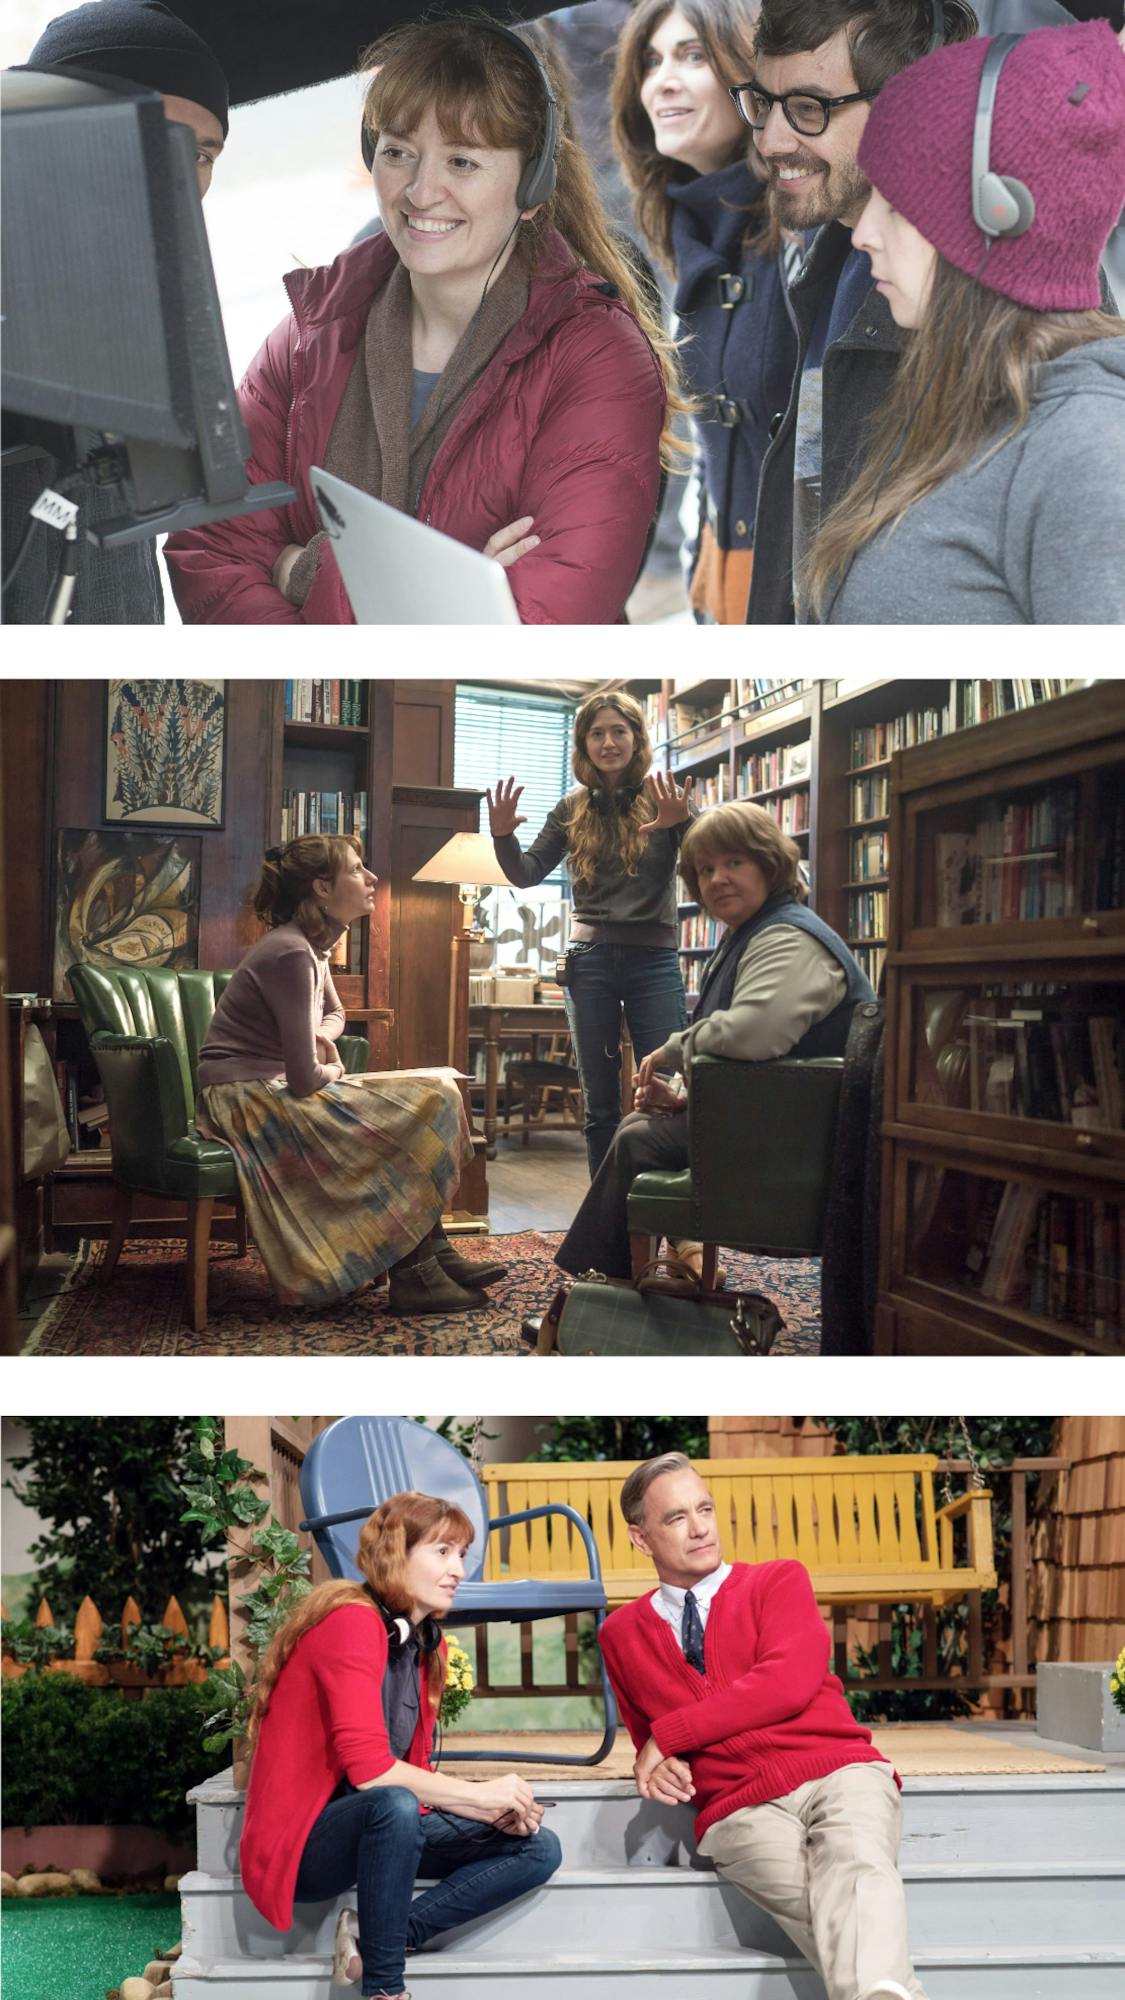 From top to bottom: Bundled in winter gear, Marielle Heller stands in front of a monitor as she directs. She’s smiling. In the second image, Dolly Wells and Melissa McCarthy sit in chairs next to a standing Marielle Heller. There are books around them and Heller gestures something with her hands. In the final image, Tom Hanks and Heller recline on the iconic front steps of Mister Rodgers’s house. He wears his trademarked khaki and red sweater combo, and she matches in a red cardigan. They look off into the distance. 